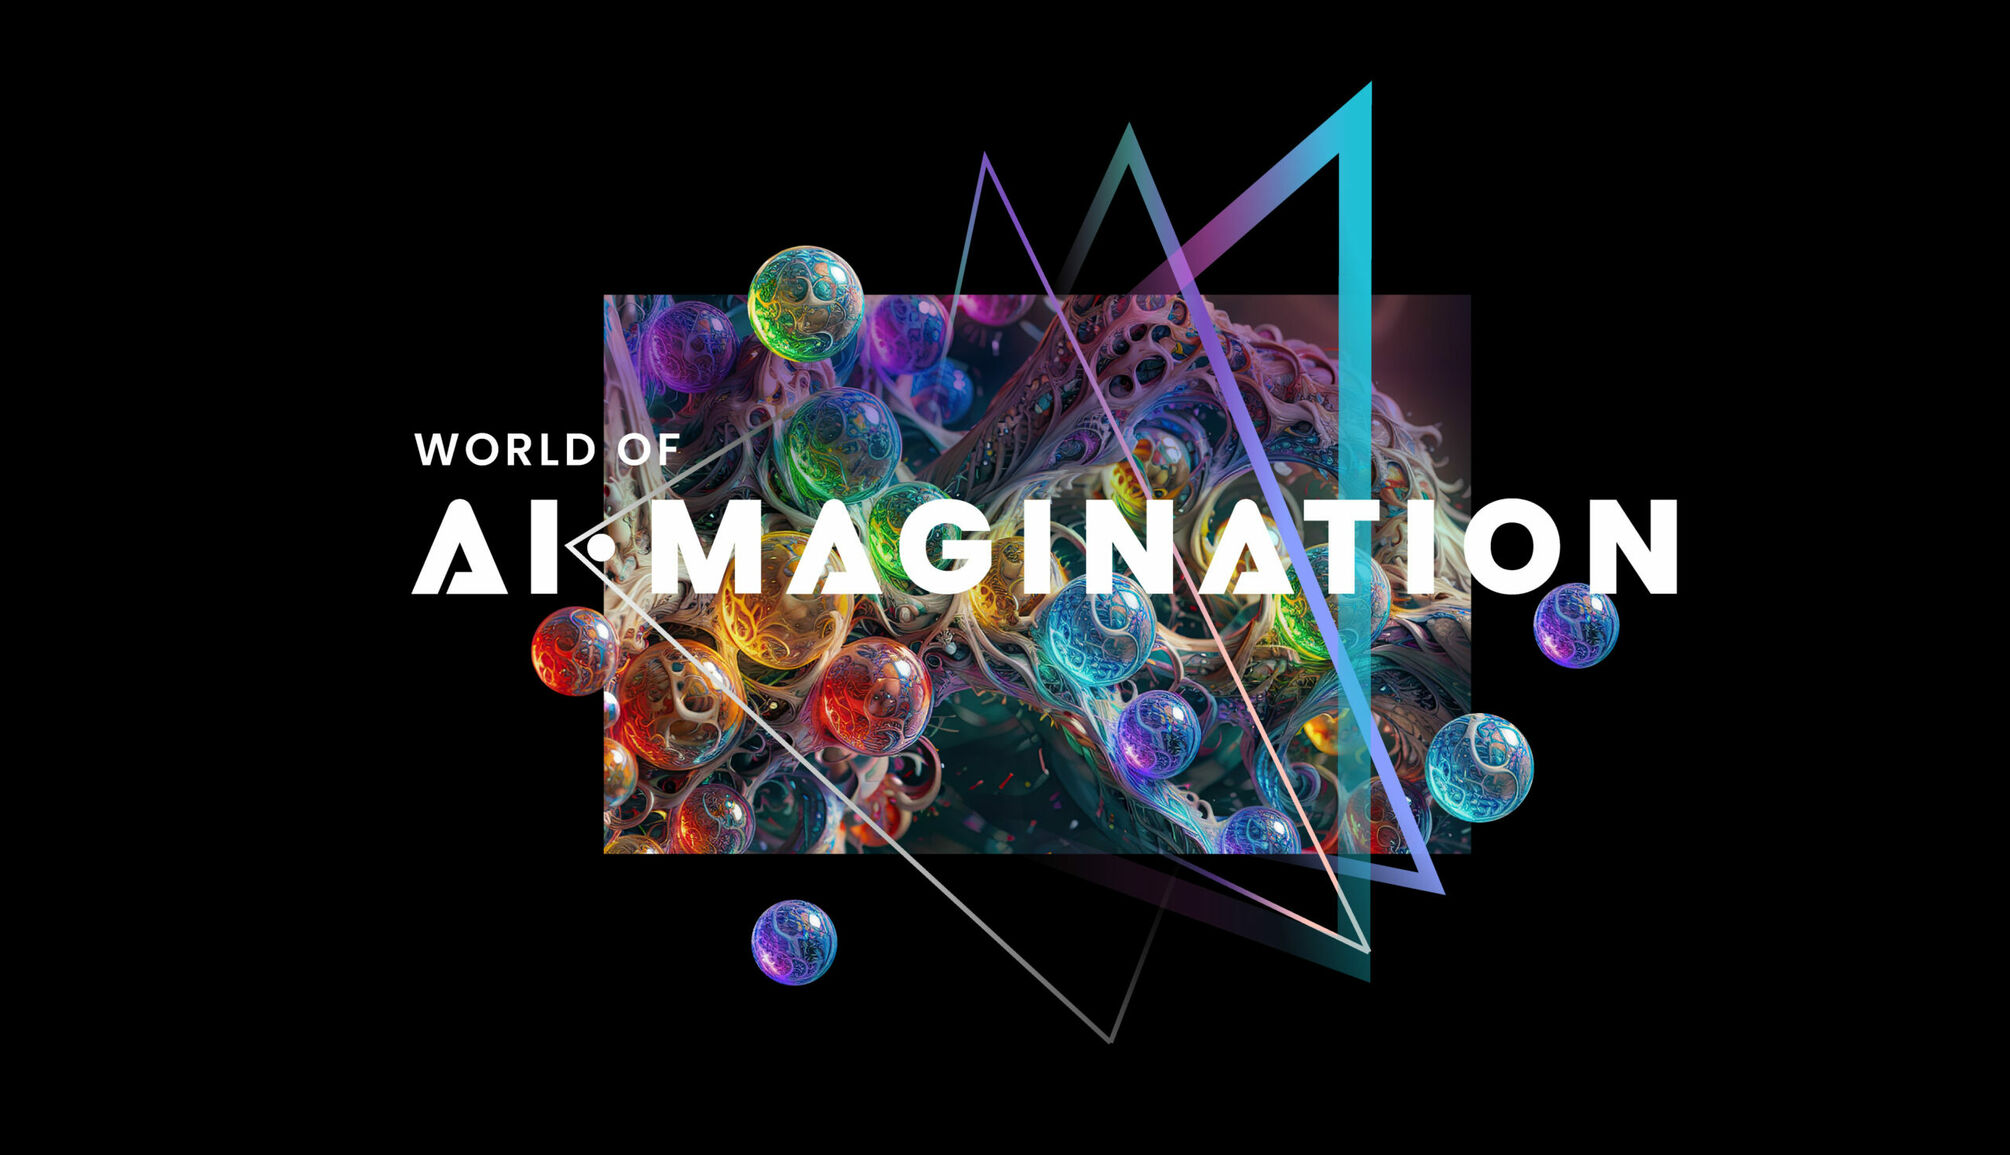 ARTECHOUSE NYC ( new york city ) introduces its latest digital art exhibition World of AI·magination futuristic ARTECHOUSE museum of mesmerizing technological and artificial intelligence. Tickets for this groundbreaking exhibition are now available, starting at $21 per person.